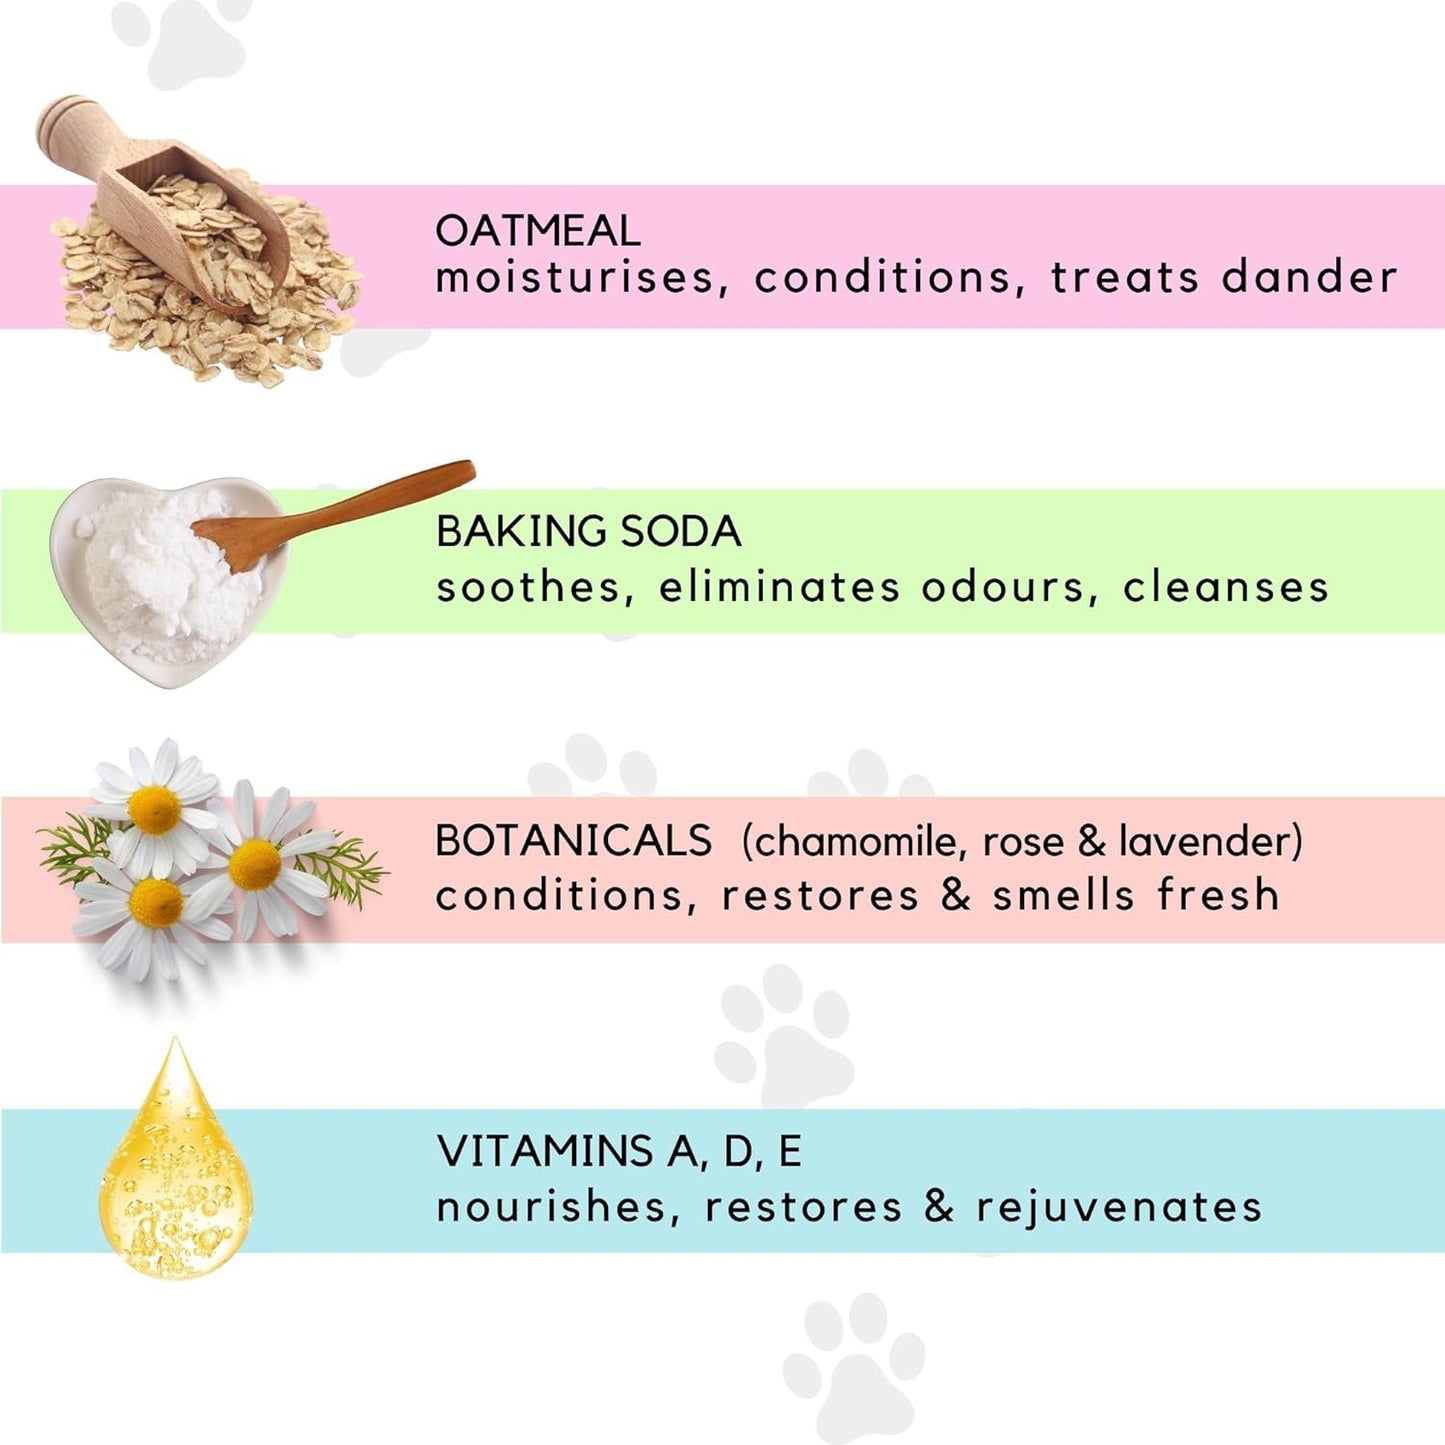 CatFresh Oatmeal & Baking Soda Spray (17oz) | Waterless Cat Shampoo and Conditioner | Natural Dry Skin Relief for Cats | Pet Dander Remover | Detangler | Essential Kitten & Cat Grooming Supplies